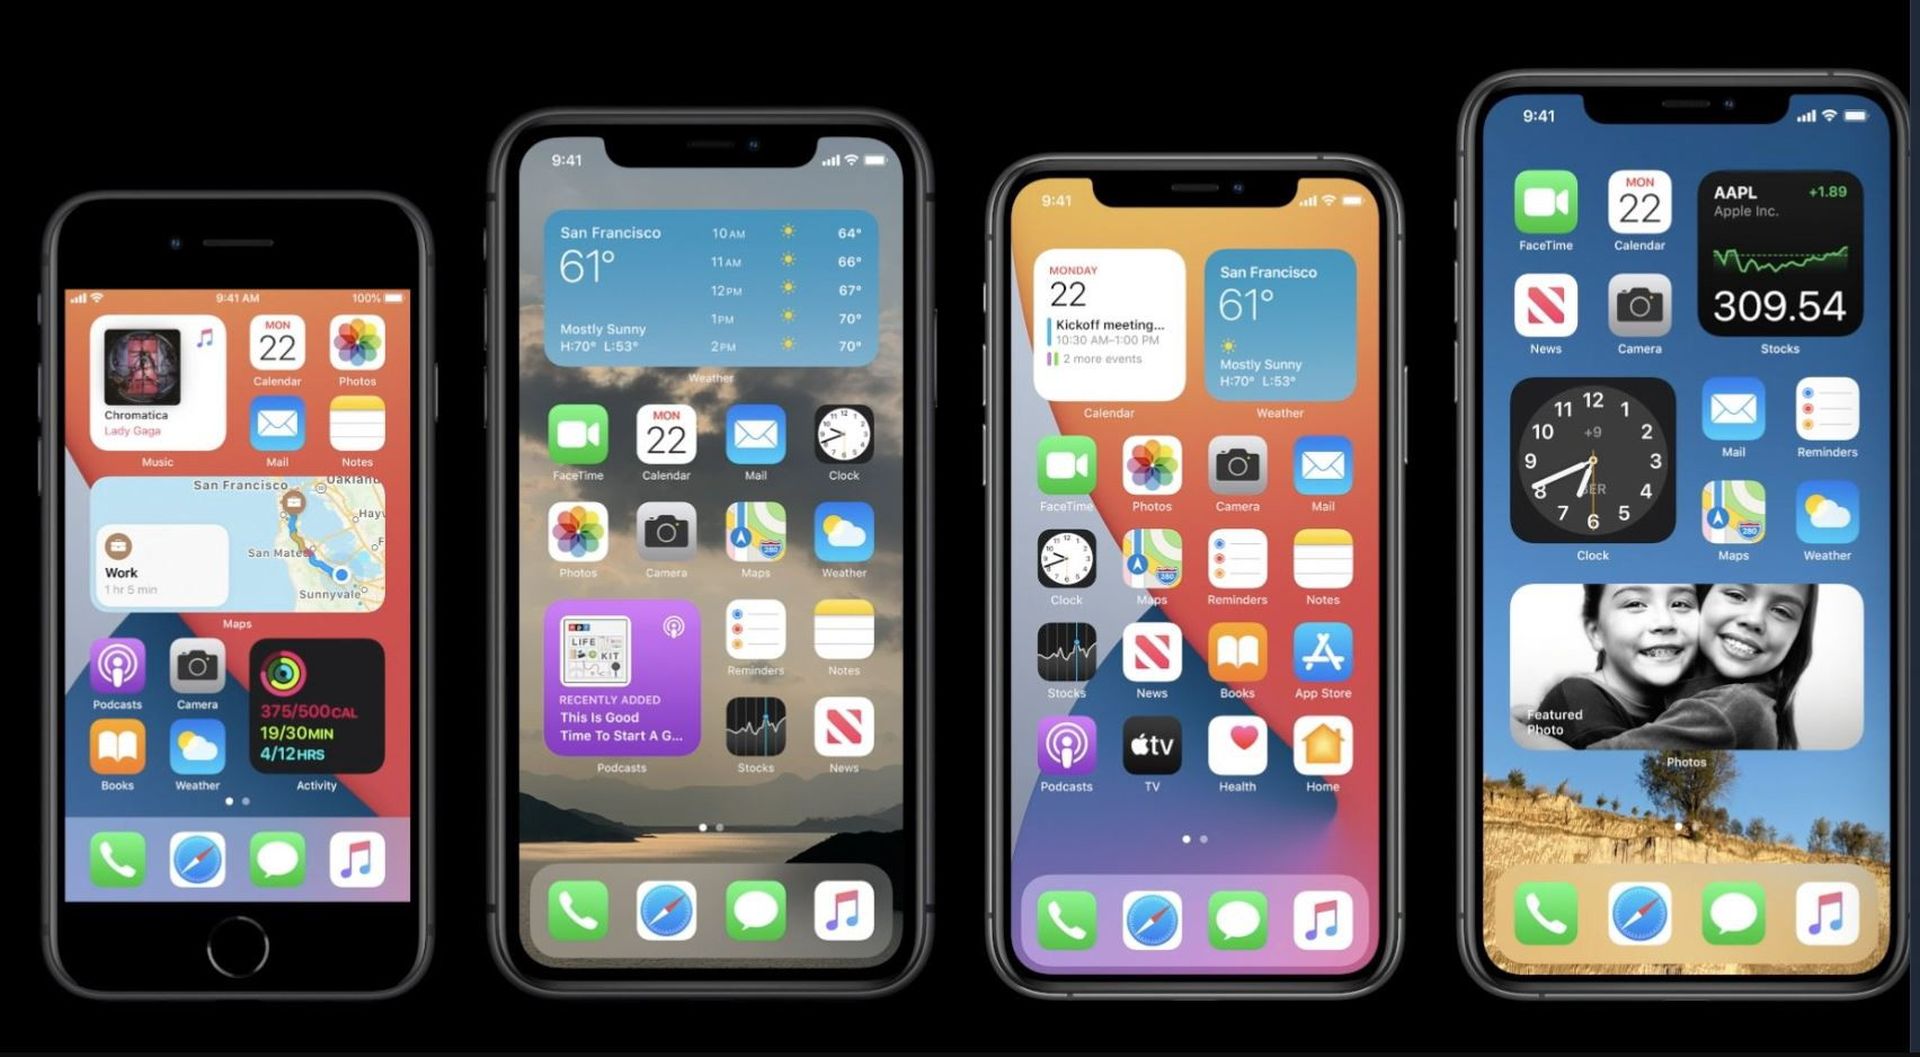 In this article, we are going to be covering the best iOS 16 Home Screen ideas, so you can have a great home screen that reflects who you are.